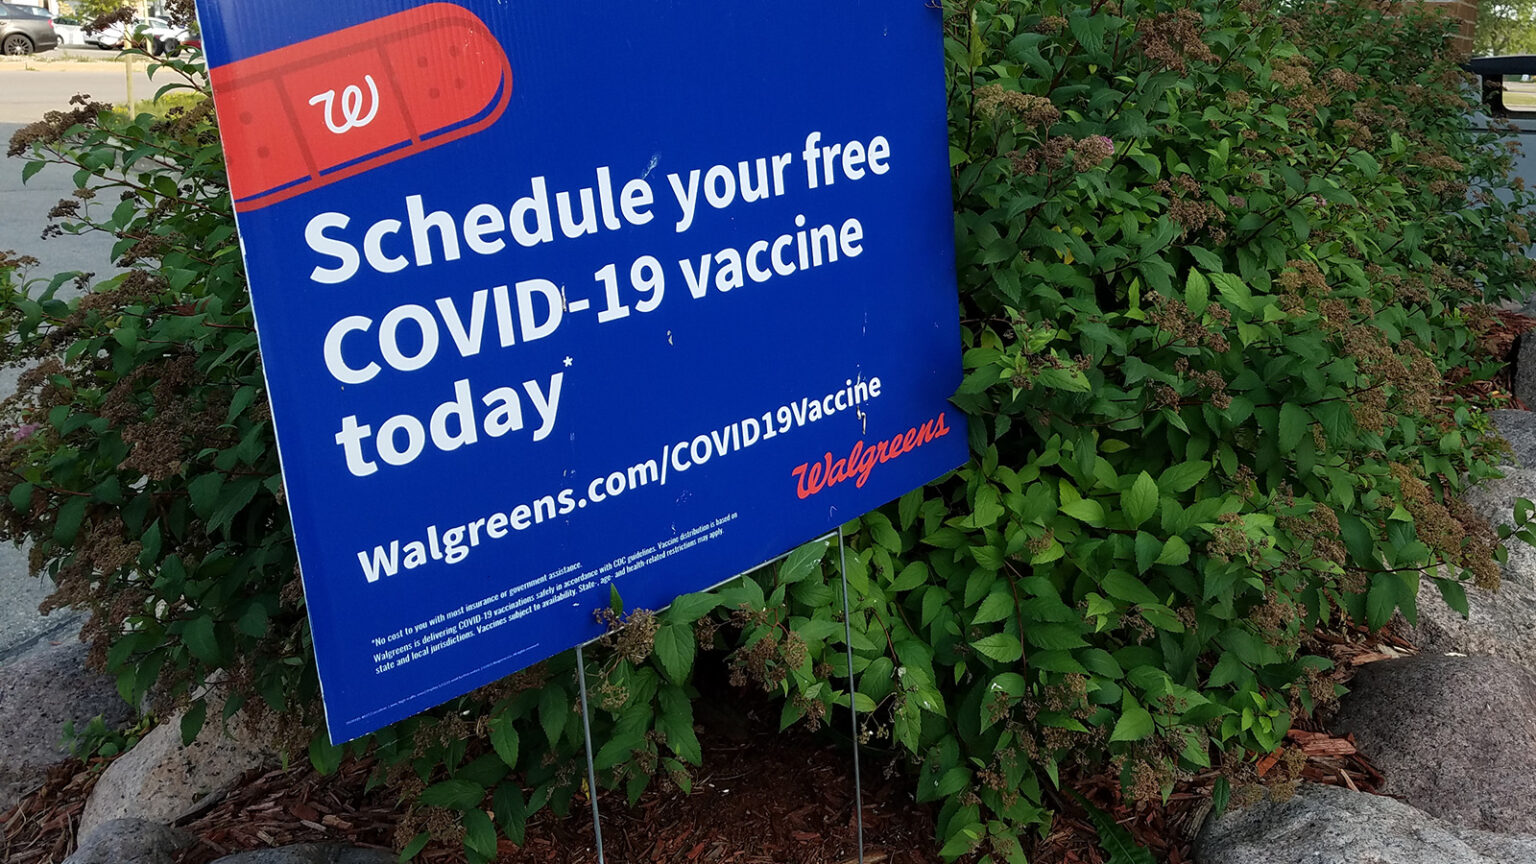 A yard sign next to bushes reads Schedule your free COVID-19 vaccine today with a Walgreens URL.